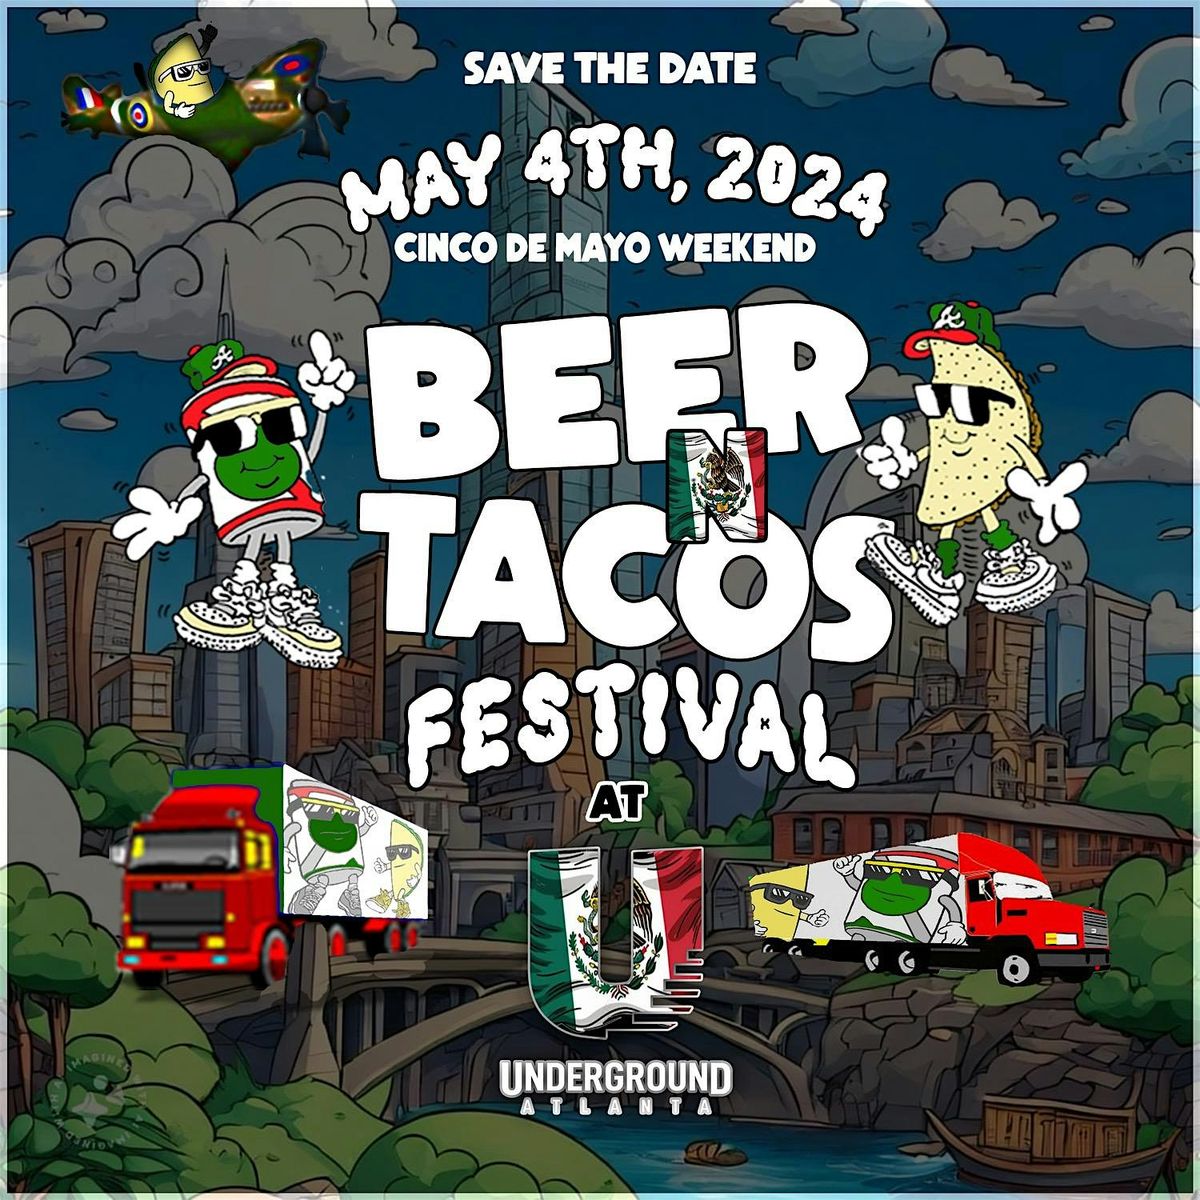 BEER AND TACOS FESTIVAL SAT. MAY 4TH CINCO DE MAYO WEEKEND @ UNDERGROUND